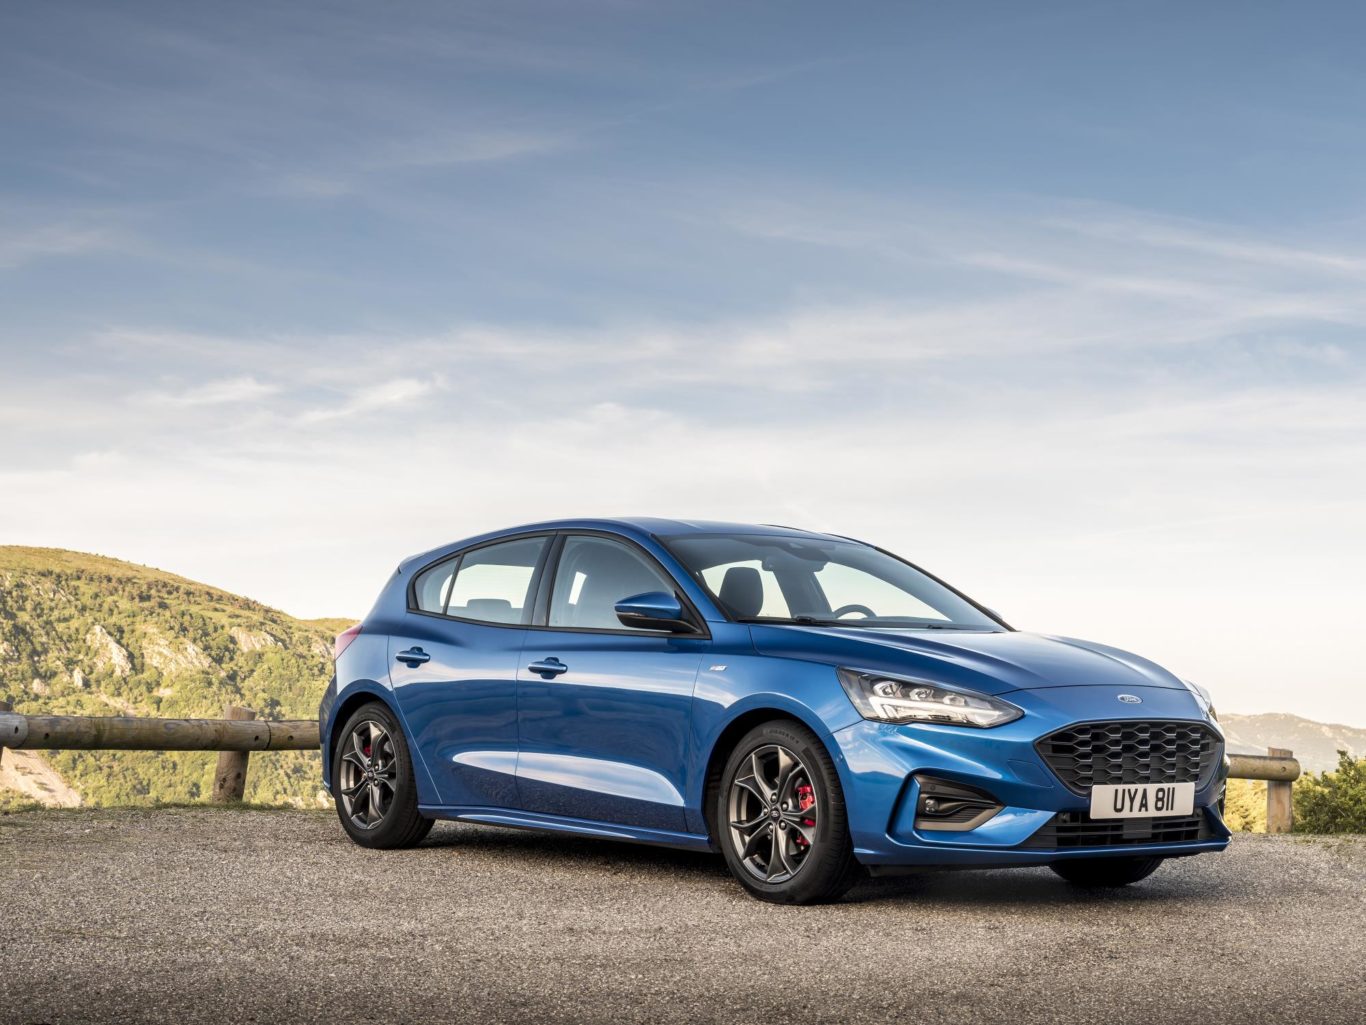 The new Ford Focus is one of the most dynamic versions yet